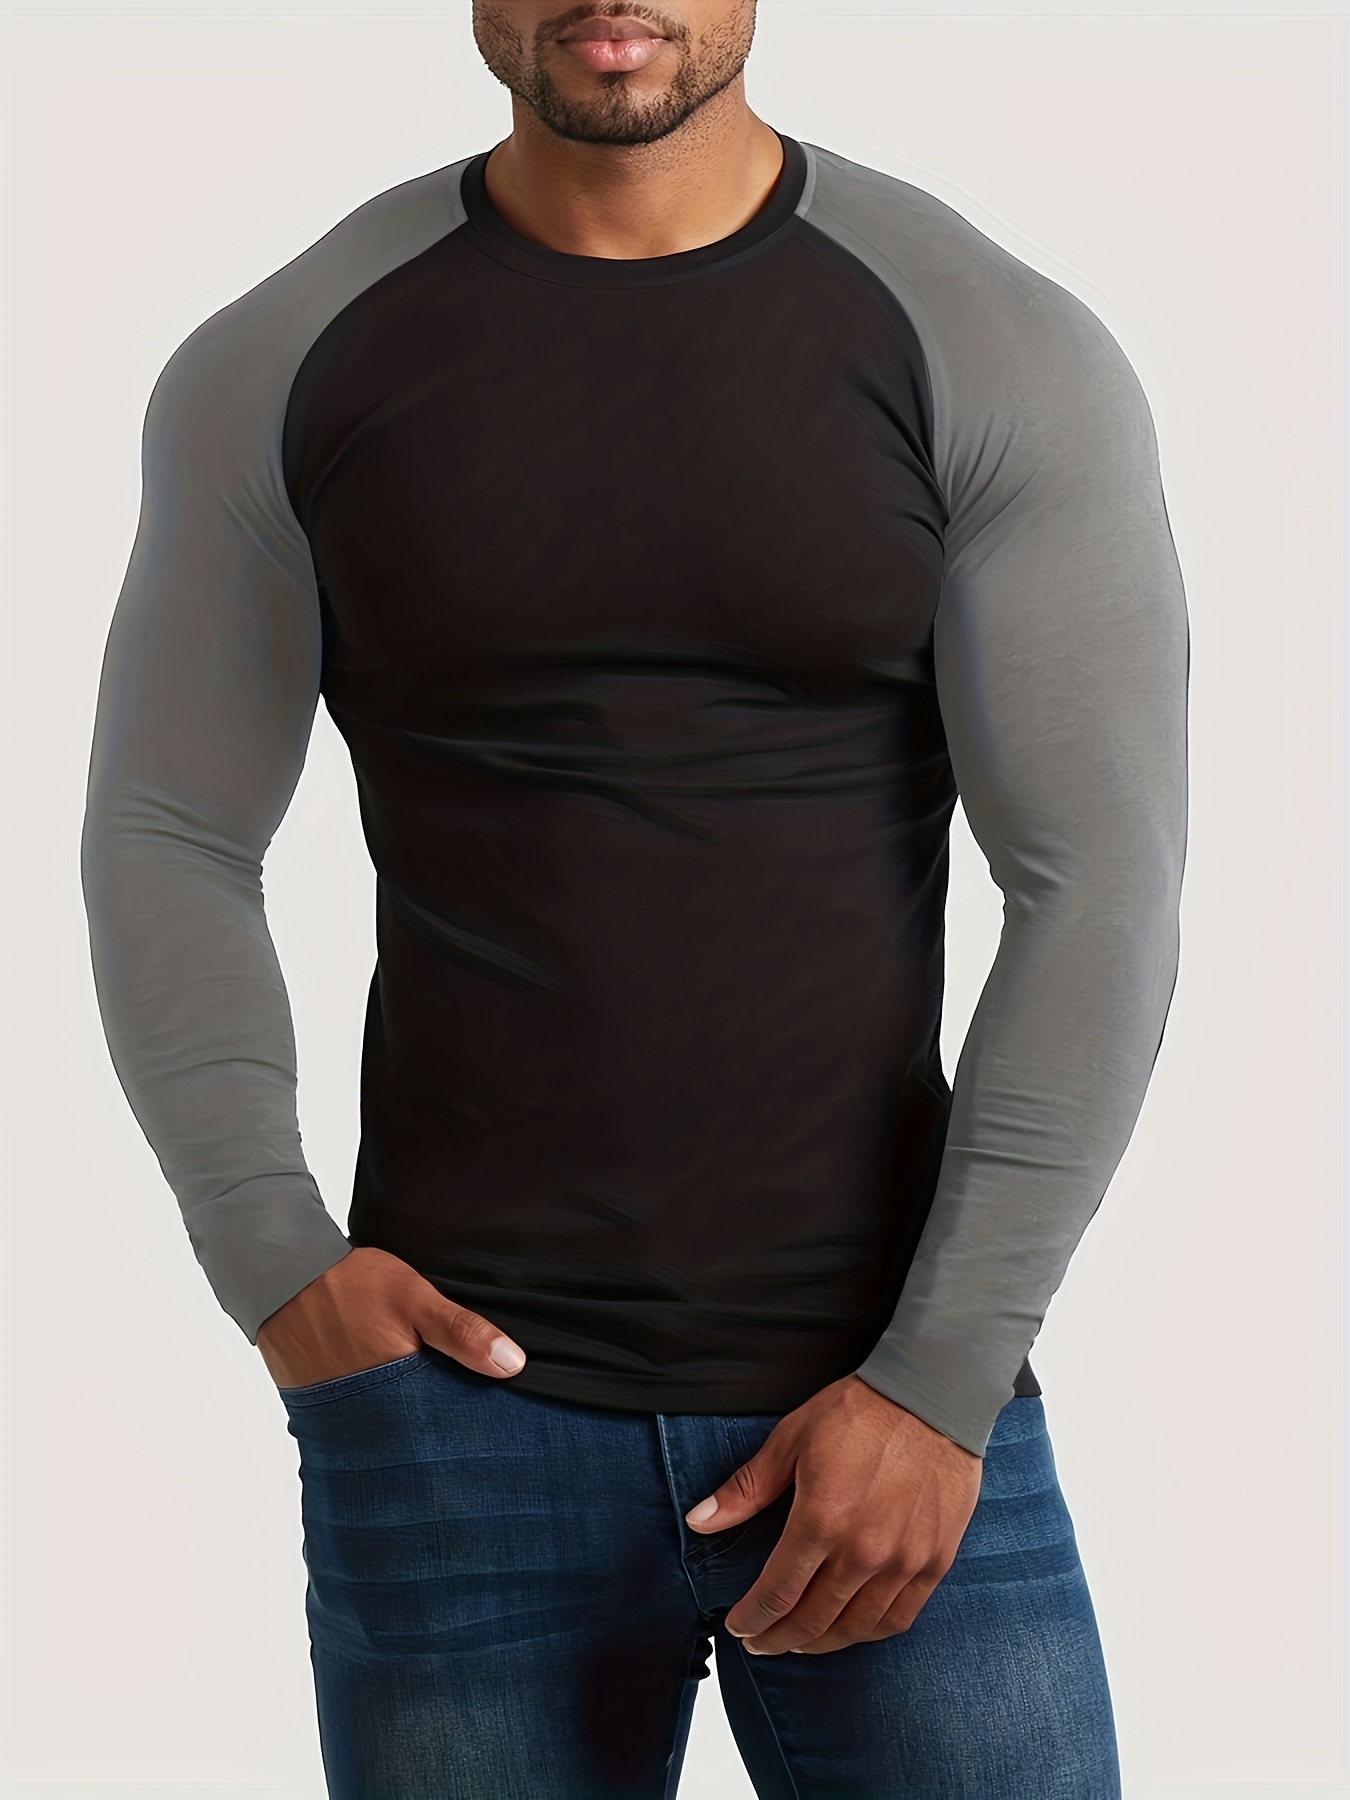 ACCIPIO]Compression Long Sleeve Shirts for Men Base Layer Top Cool  Undershirts Dry Fitness T-Shirt